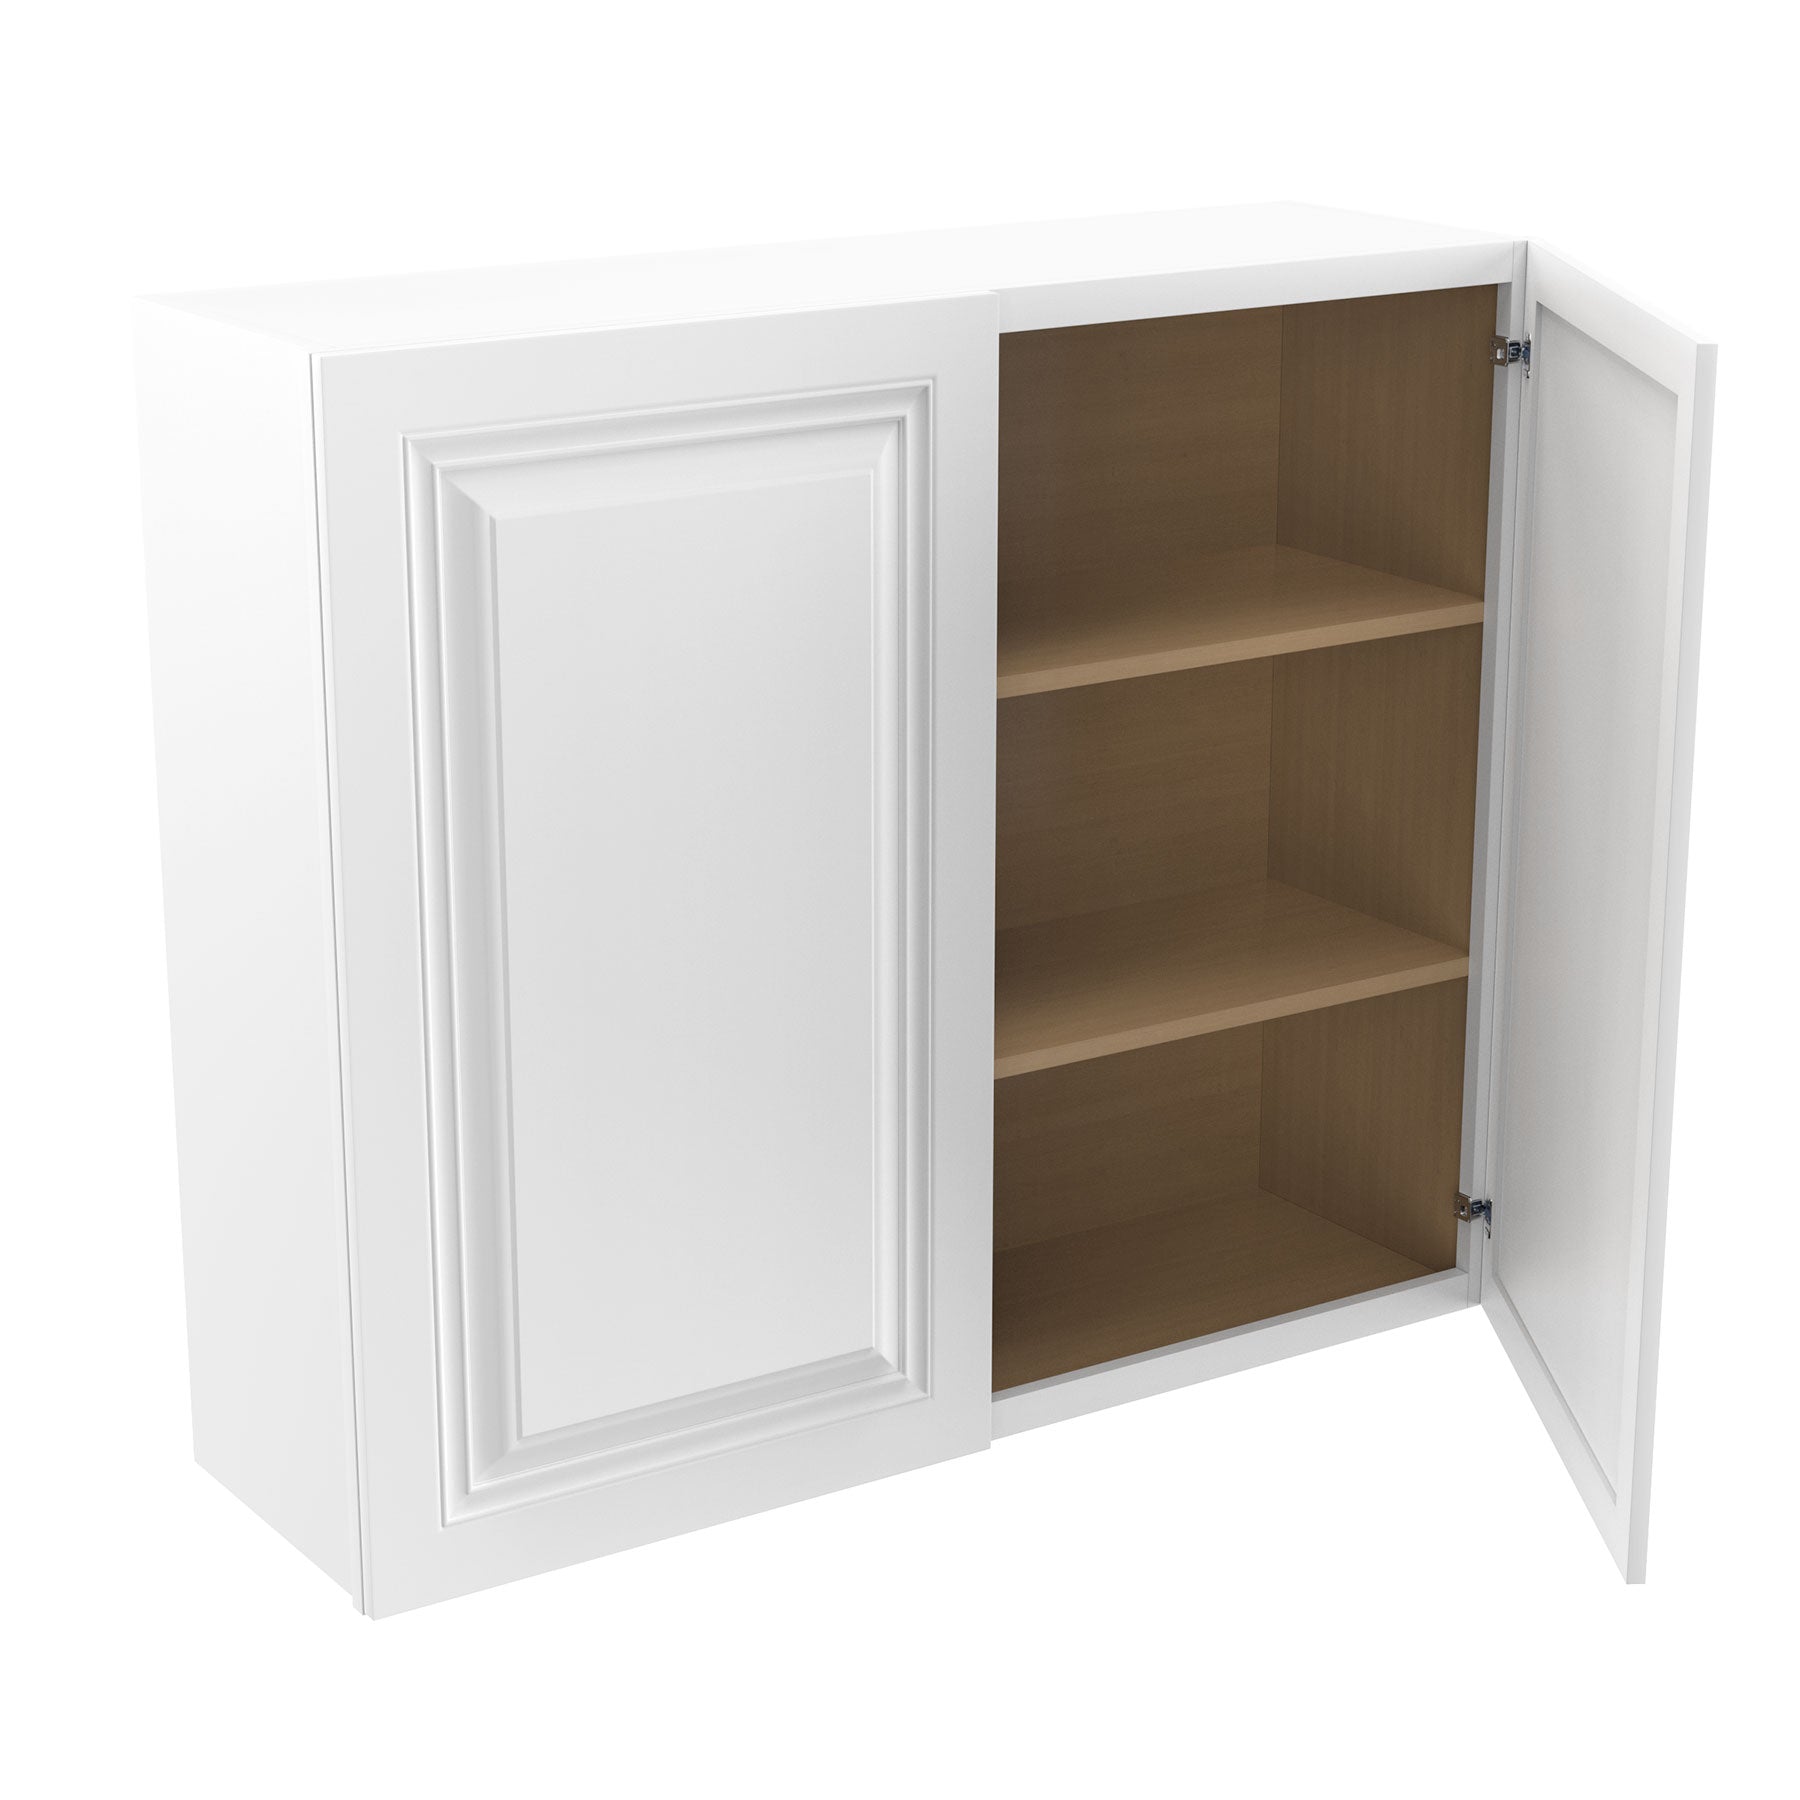 RTA - Park Avenue White - 36" High Double Door Wall Cabinet | 42"W x 36"H x 12"D